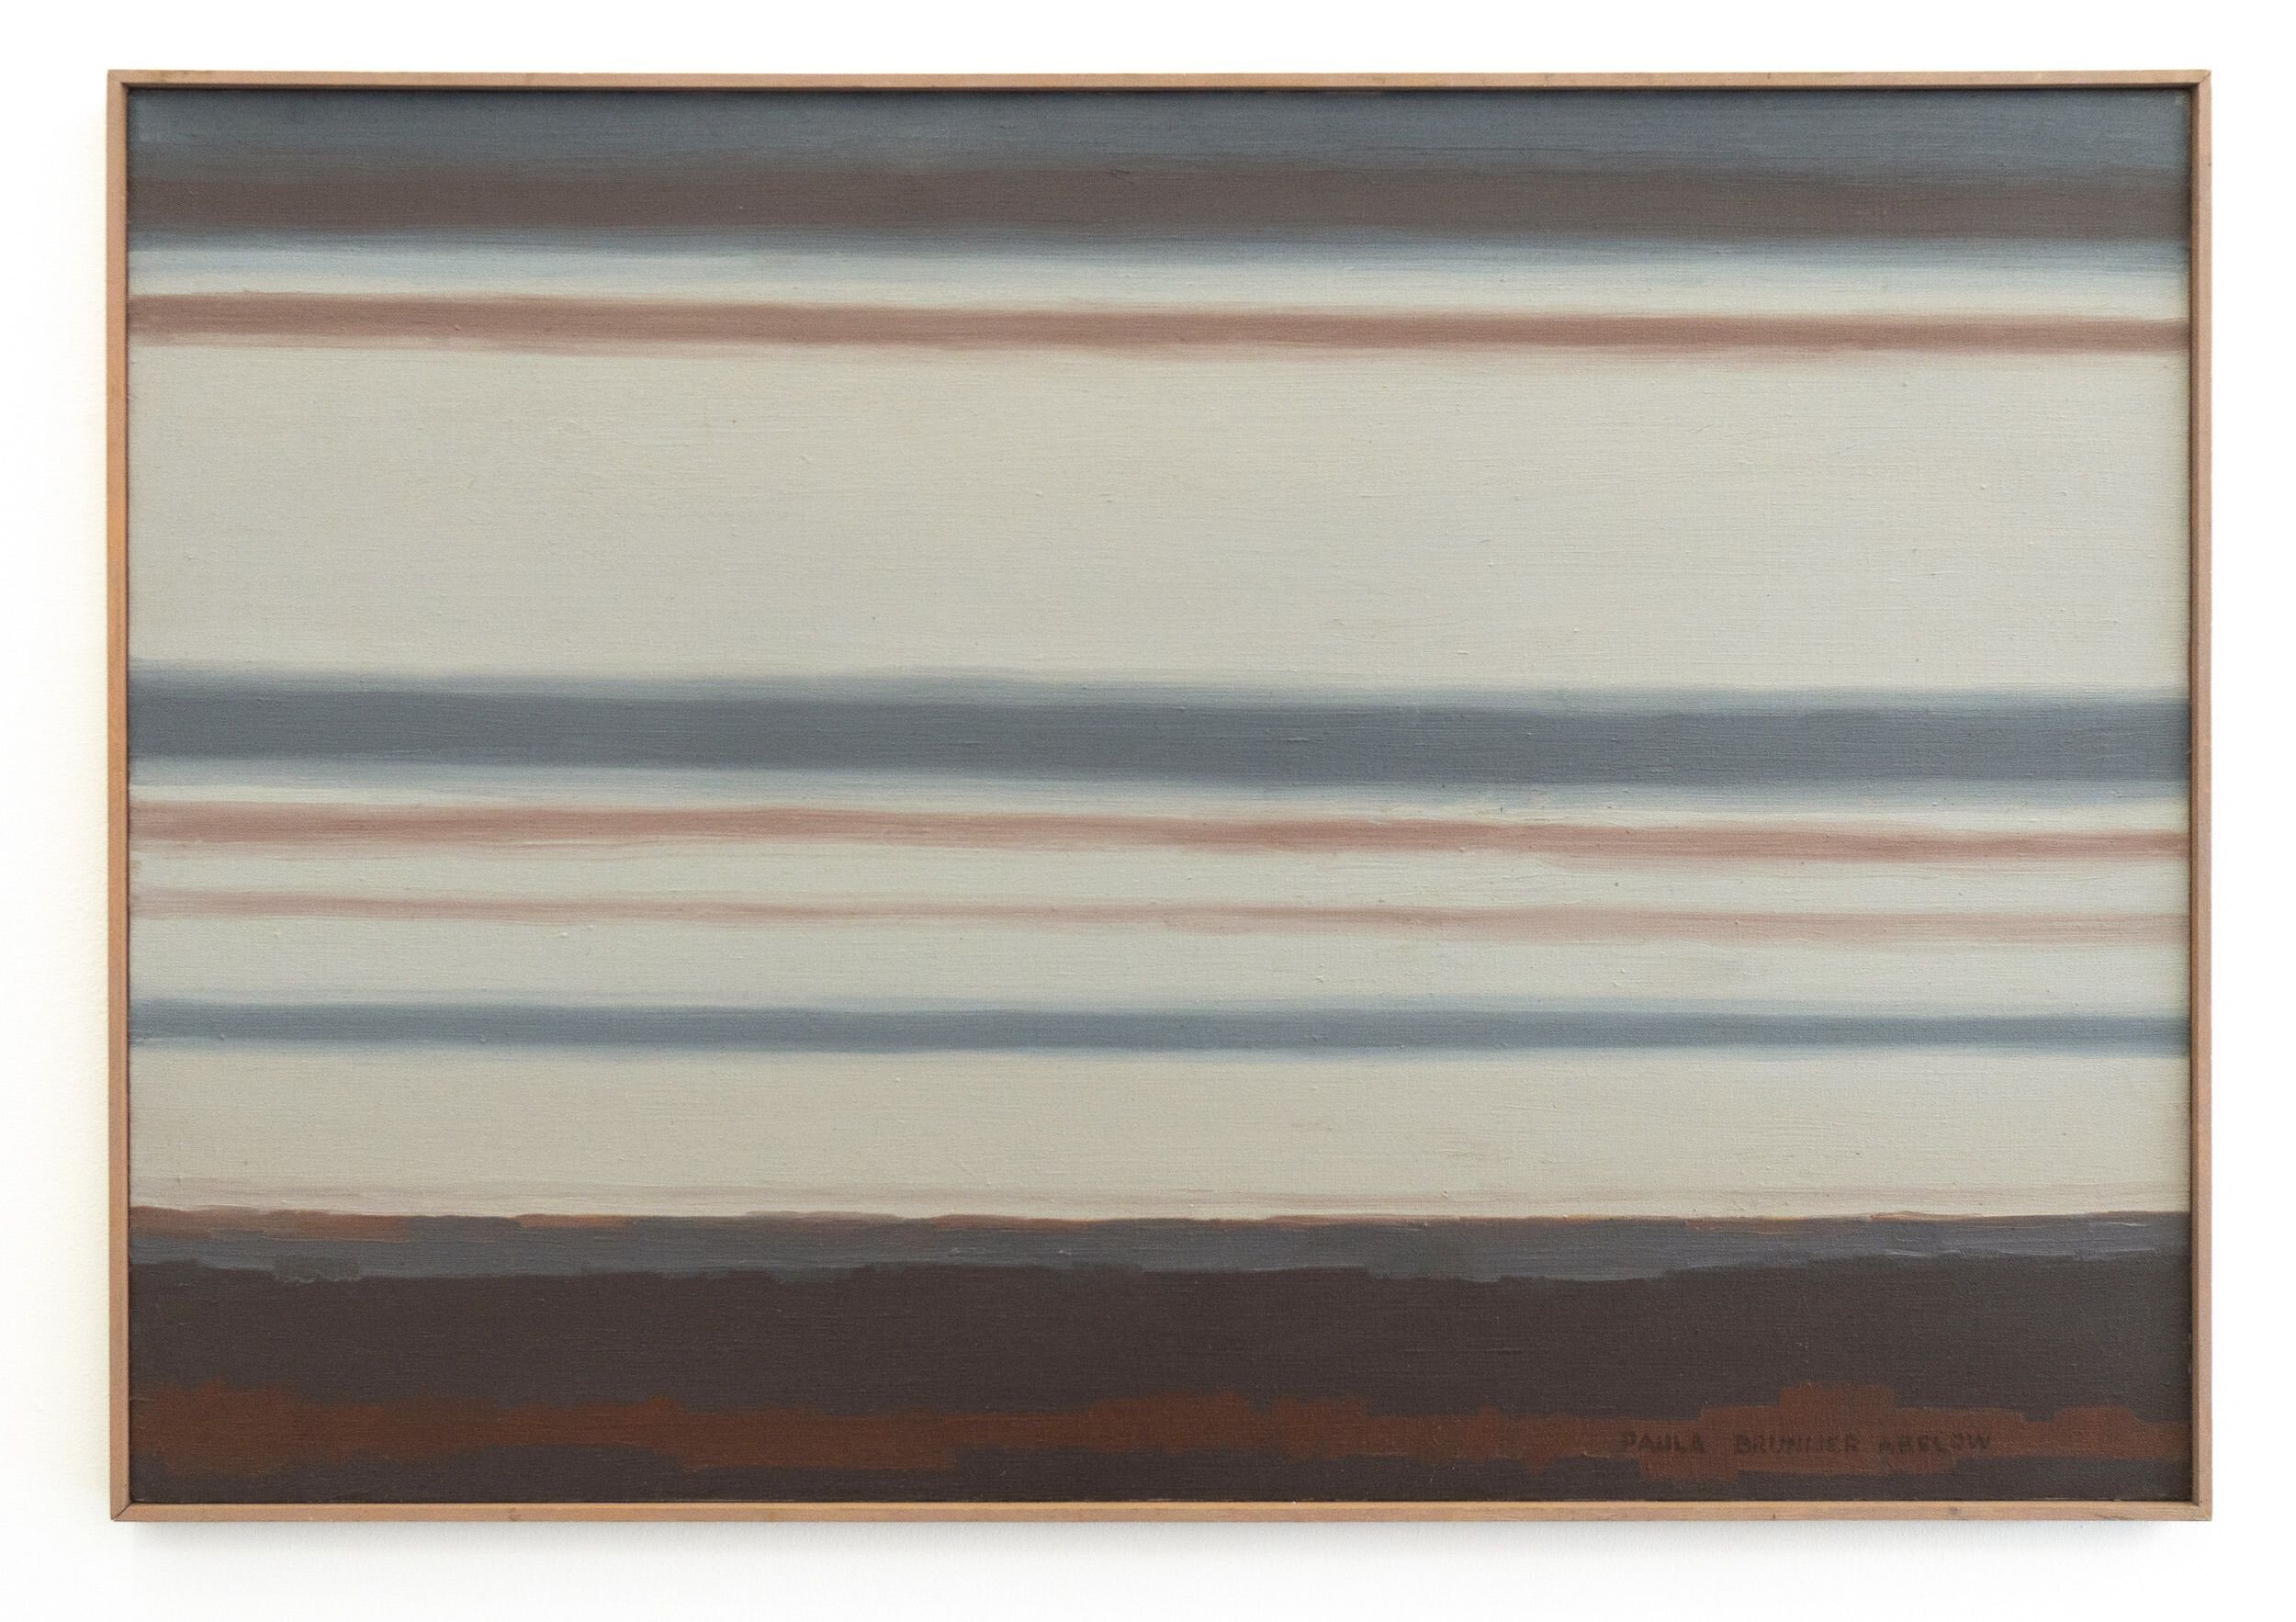  Paula Brunner Abelow  No title , 1968 Oil on linen with artist’s frame 26.5 x 38.5 inches 